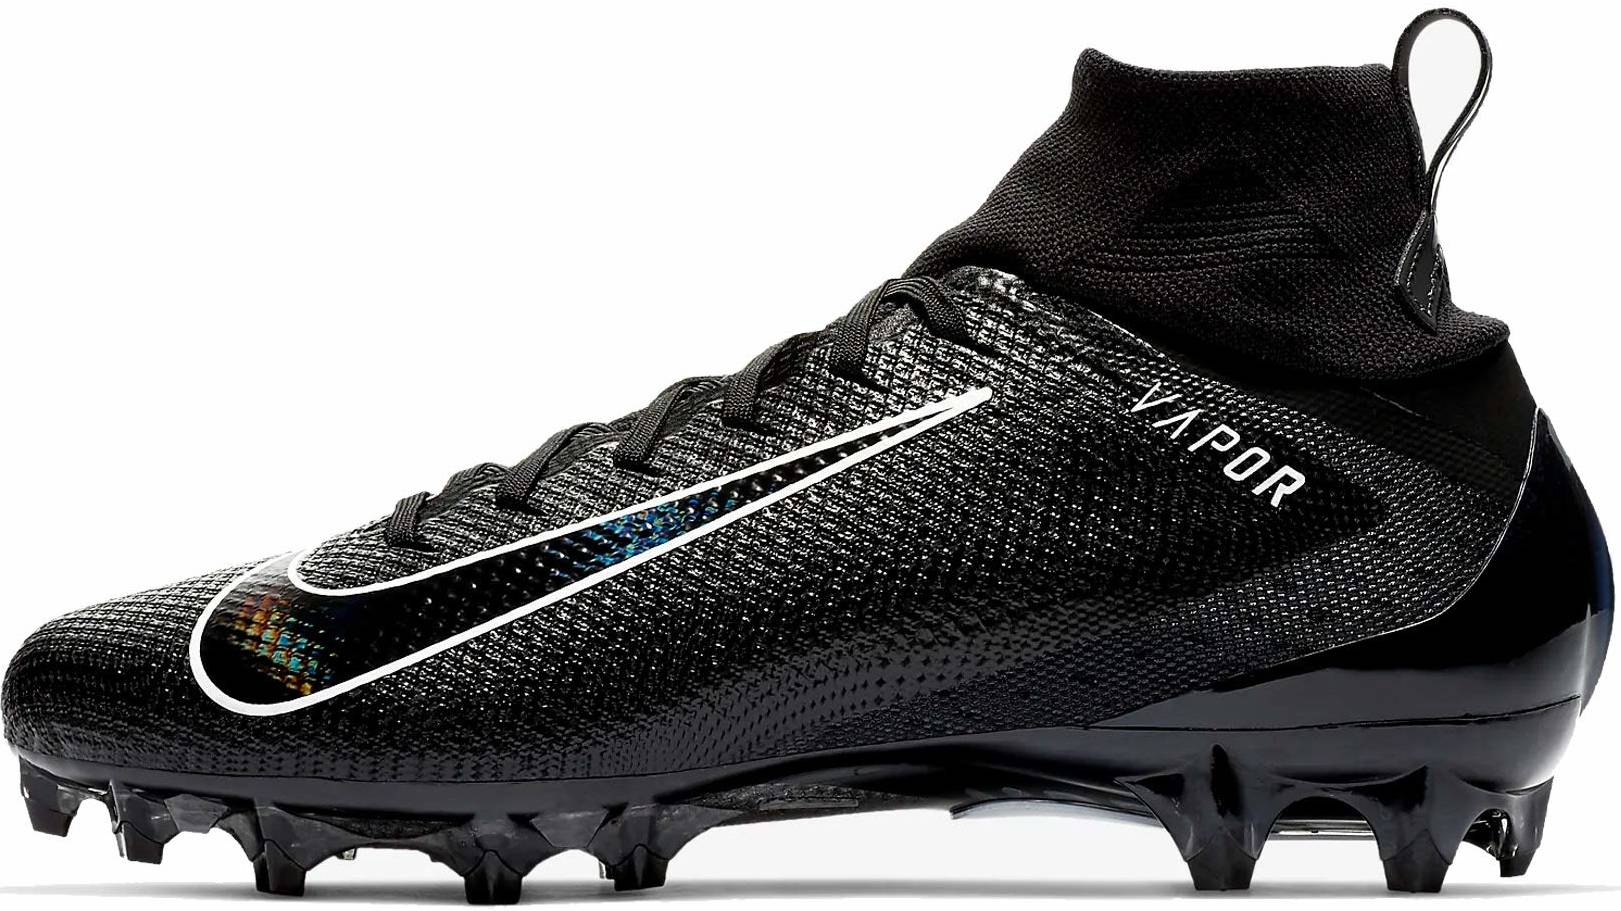 Save 66% on Wide Football Cleats (41 